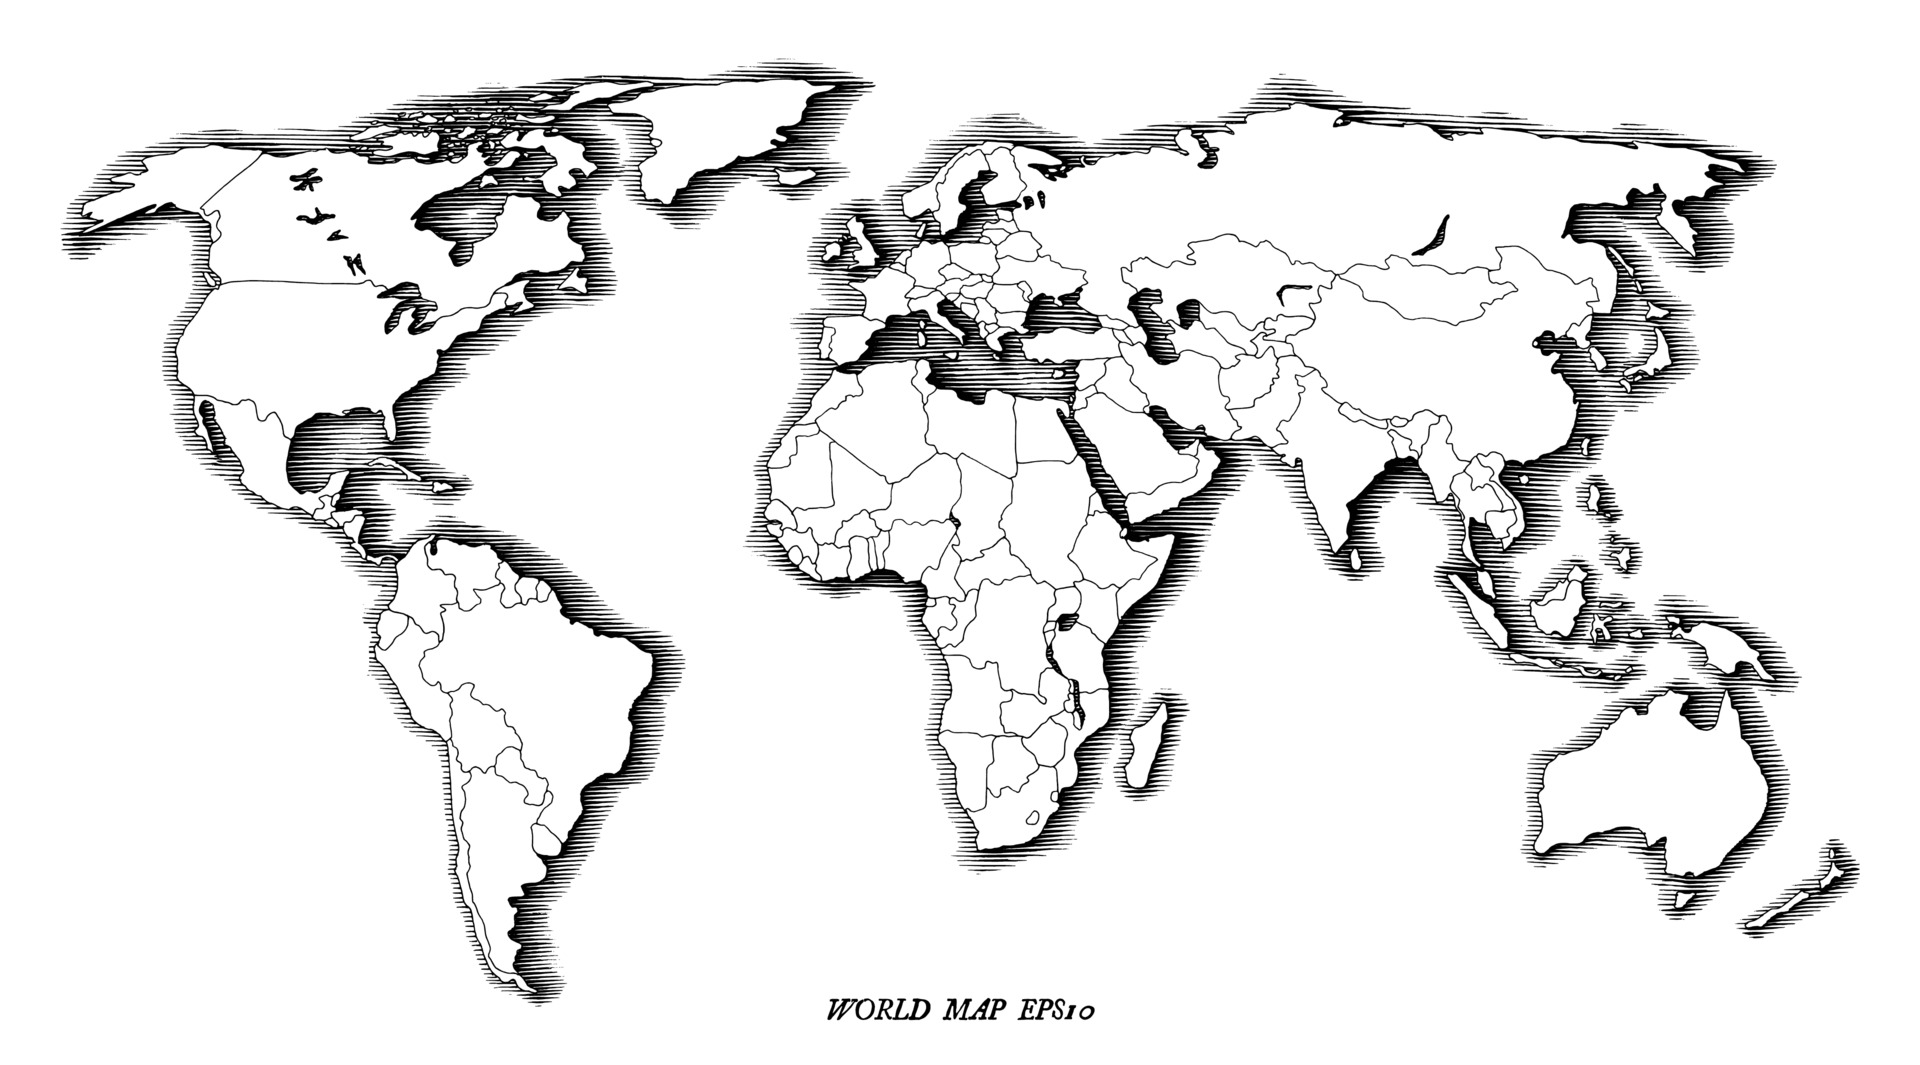 World Map Hand Drawing Vintage Style Black And White Art Isolated On White Background Download Free Vectors Clipart Graphics Vector Art